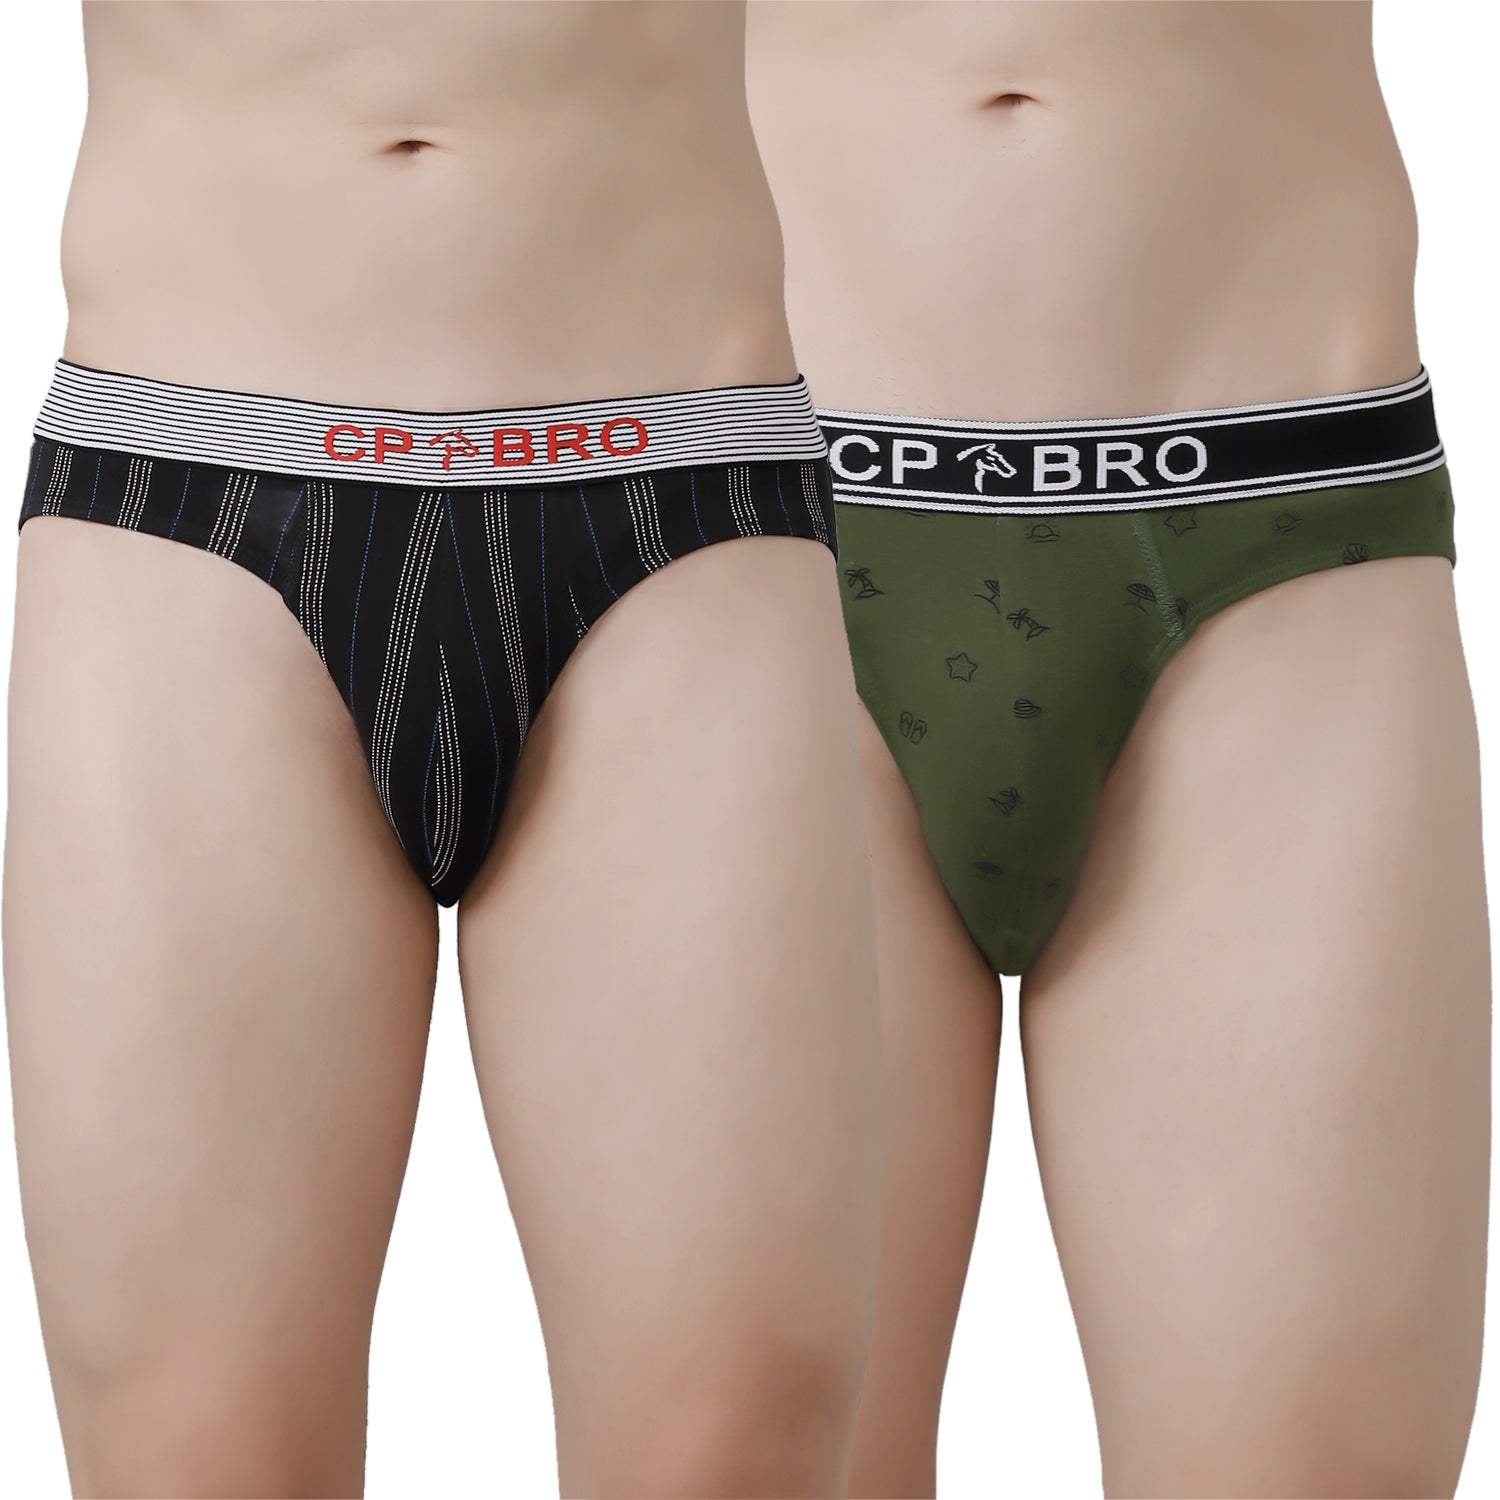 CP BRO Men's Printed Briefs with Exposed Waistband Value Pack - Black